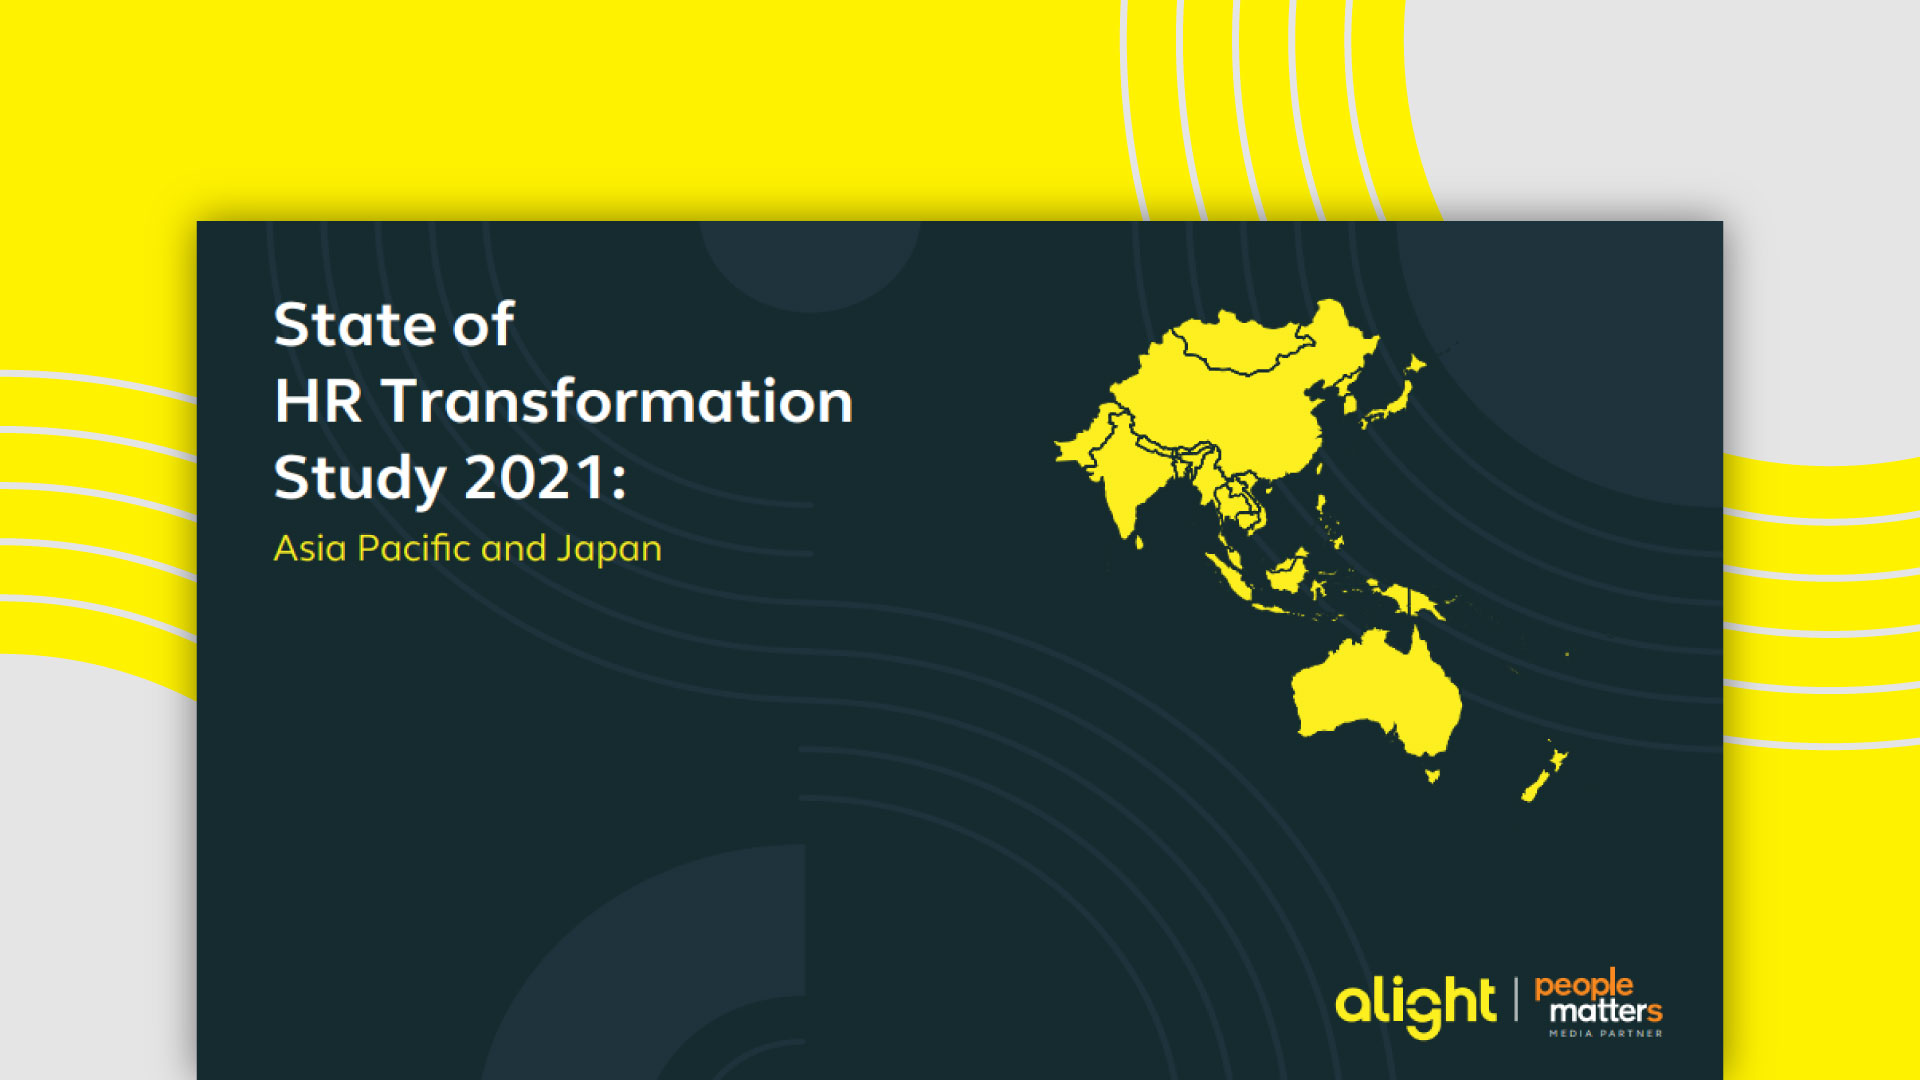 State of HR Transformation Study 2021 in Asia Pacific and Japan